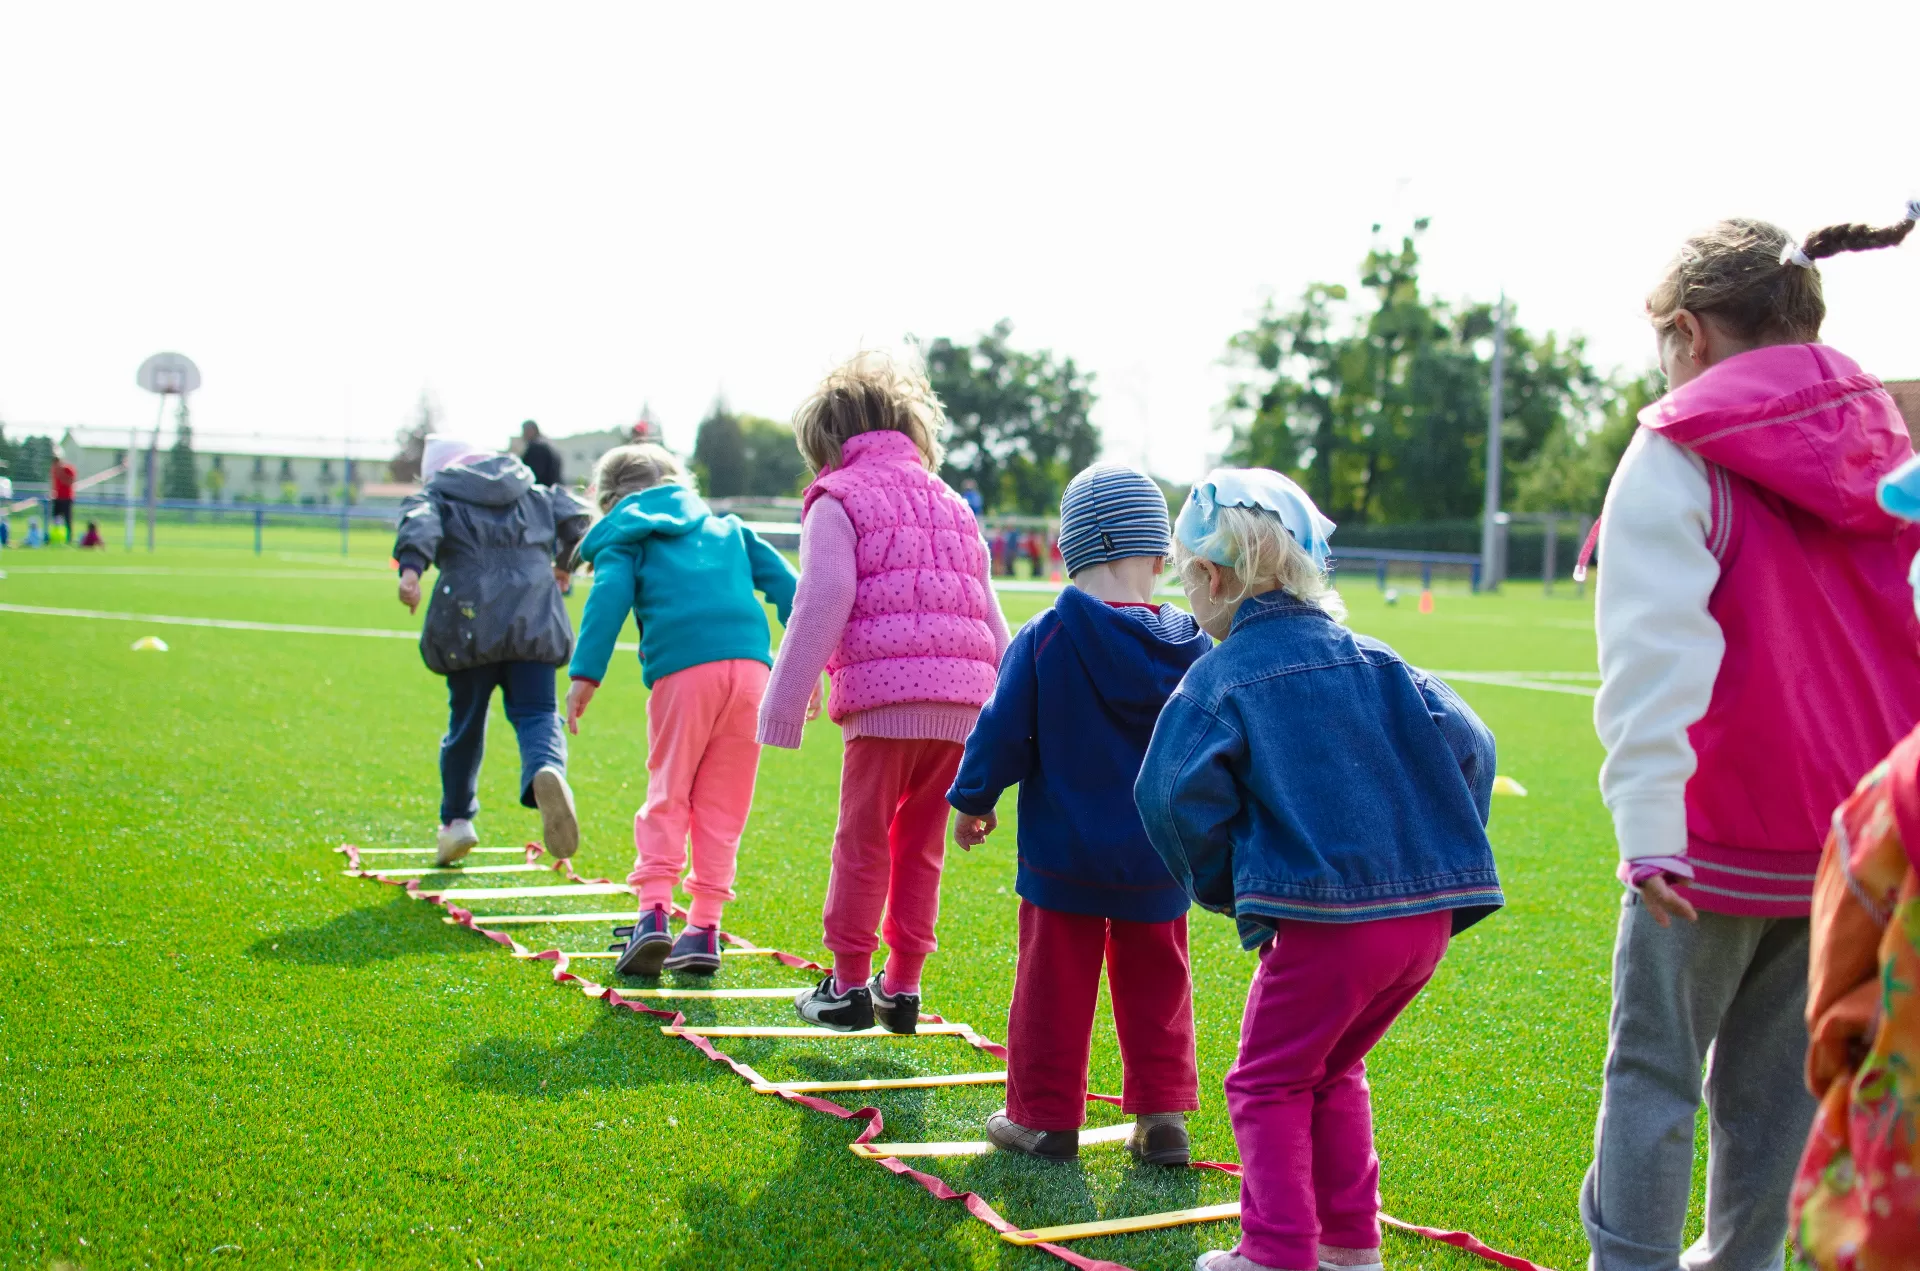 A line of children playing on a ladder on the grass